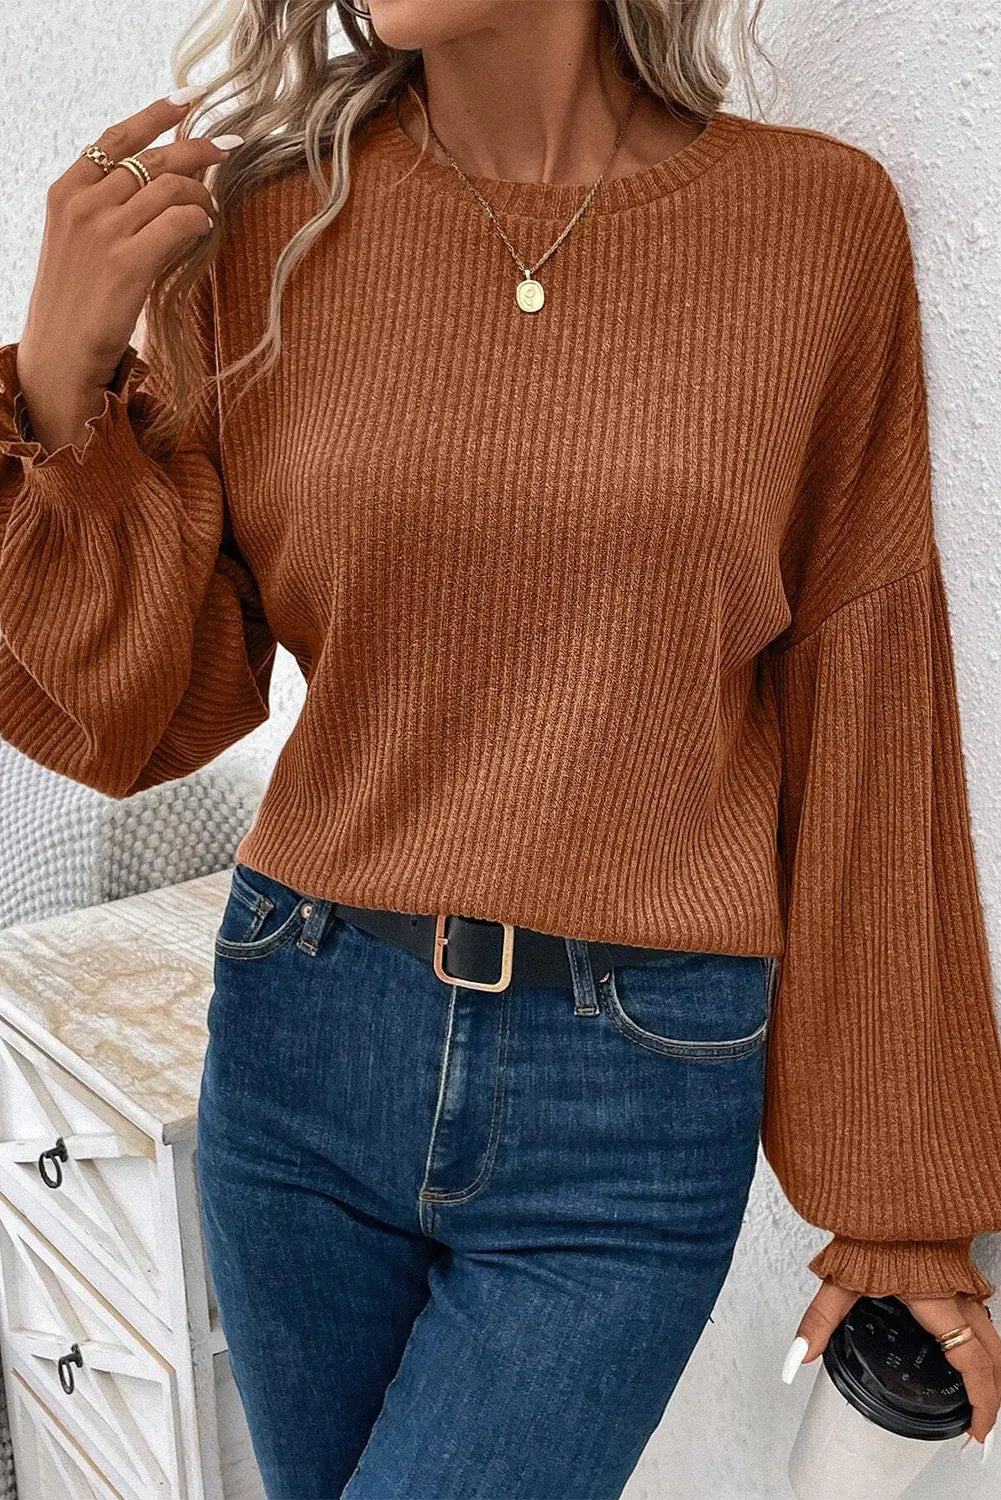 Chestnut ribbed knit drop shoulder ruffled sleeve textured top - long tops